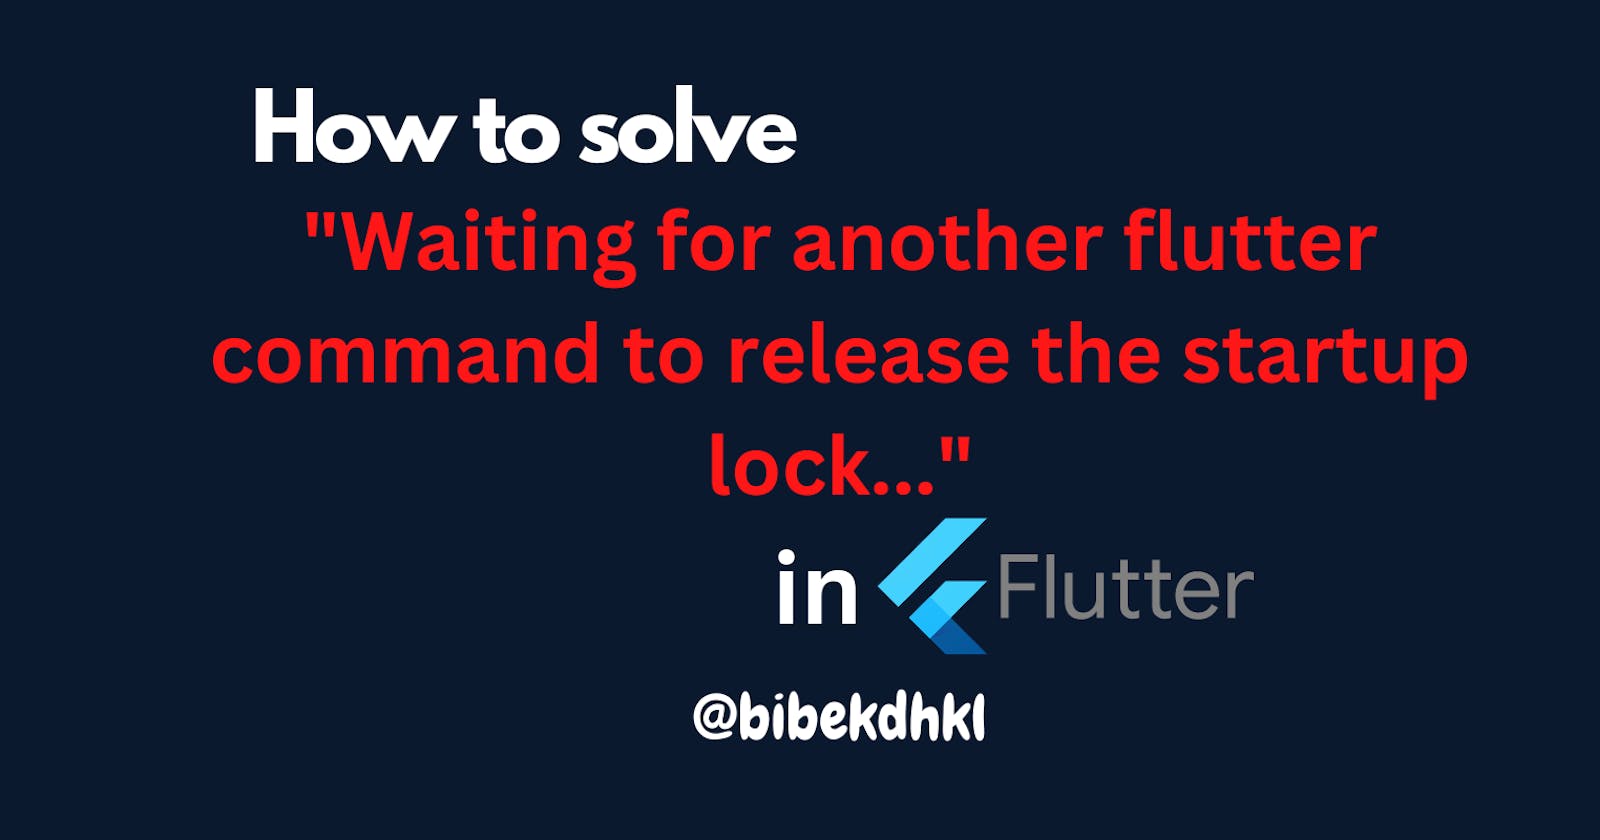 How to solve the "Waiting for another flutter command to release the startup lock..." issue in Flutter?